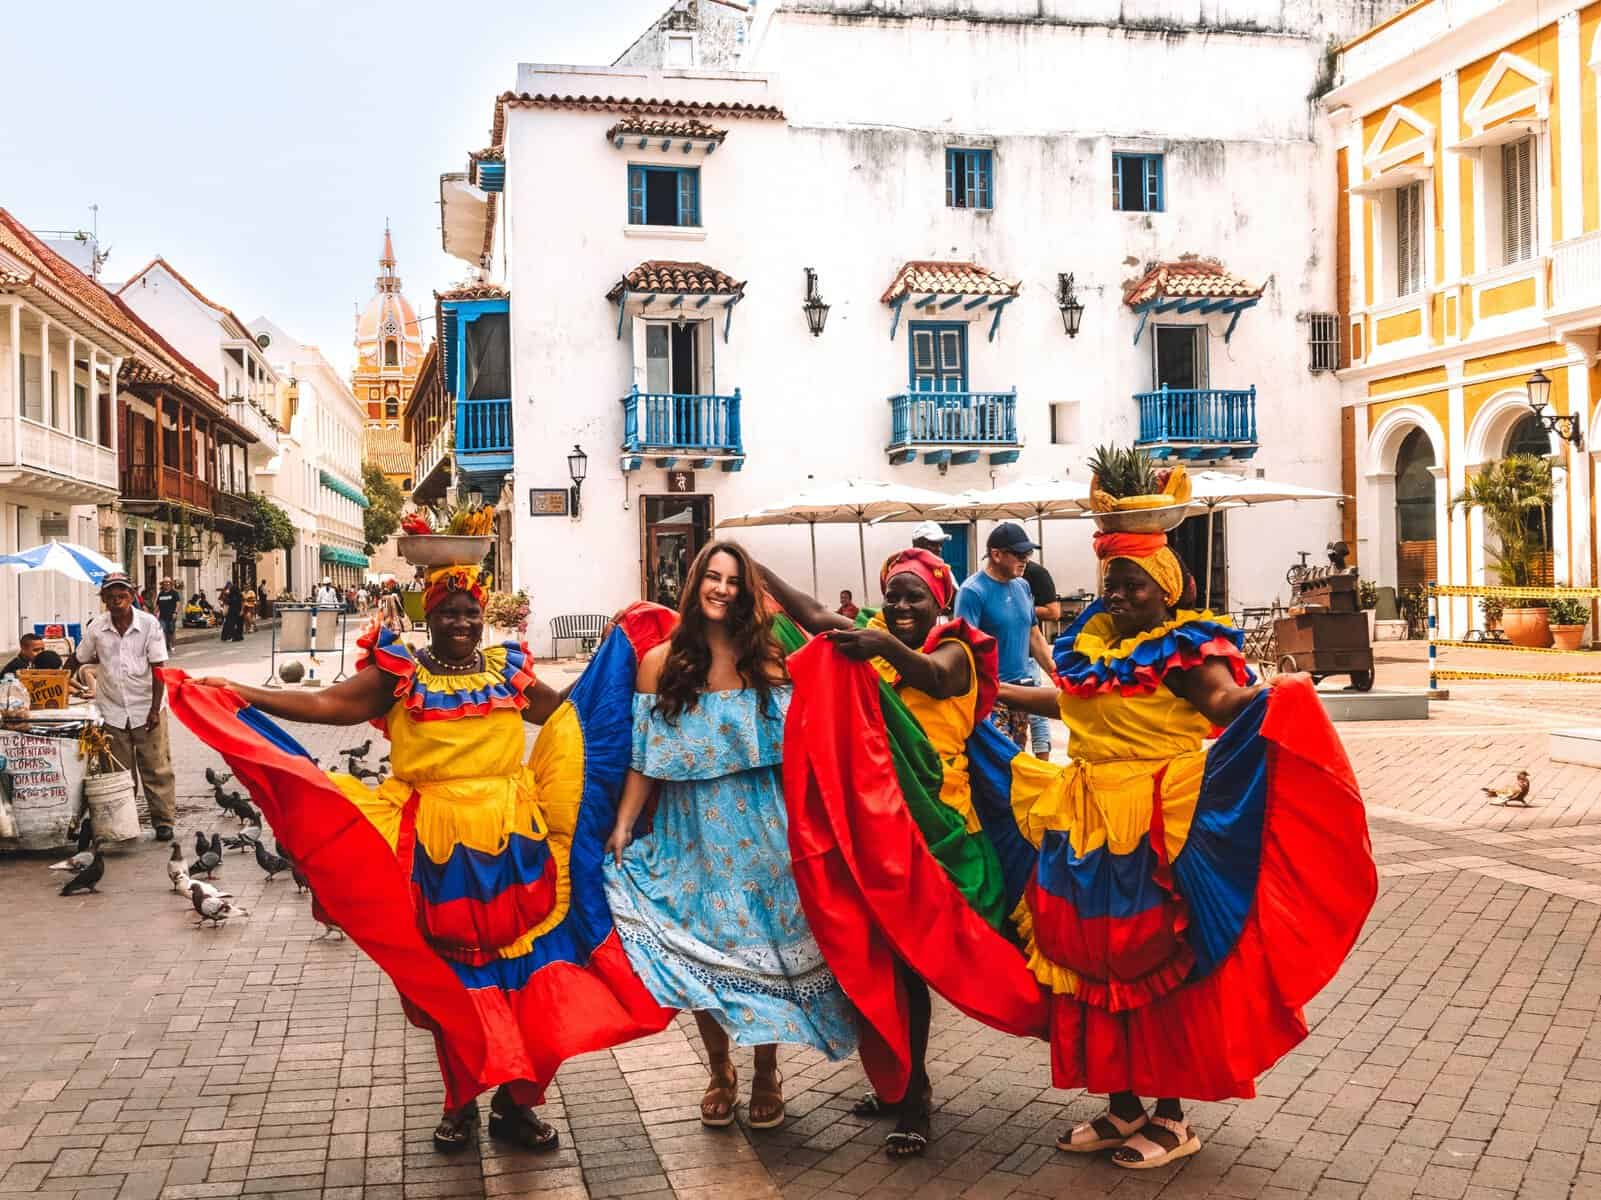 Me dancing with three palenqueras on the streets of Cartagena. Getting your photo taken with the palenqueras is absolutely one of the best things to do in Cartagena!